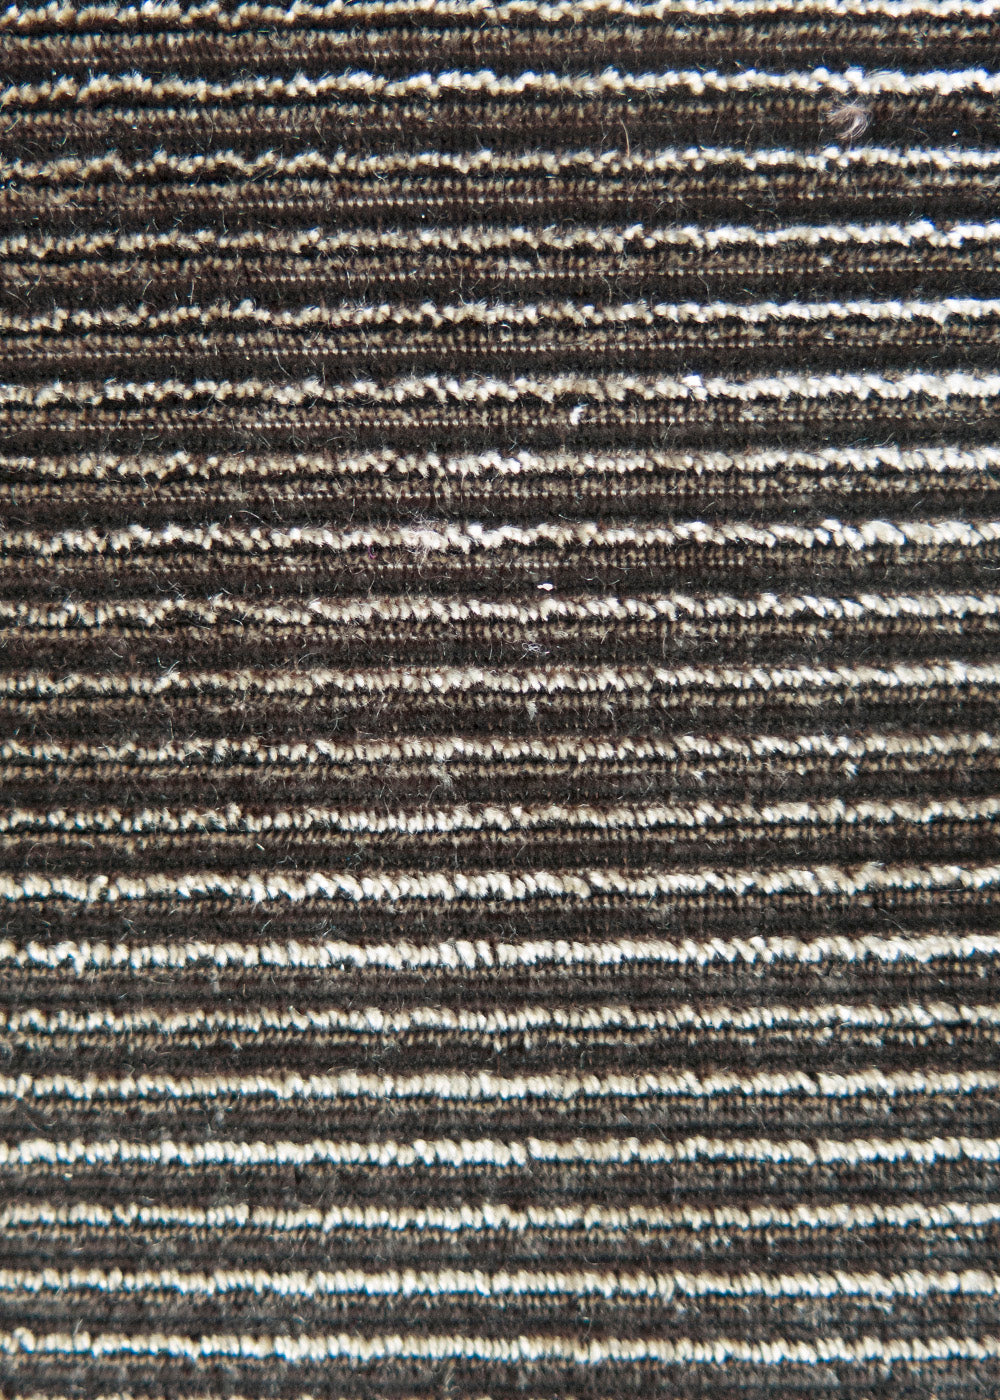 rich brown colored velvet with horizontal ribbing